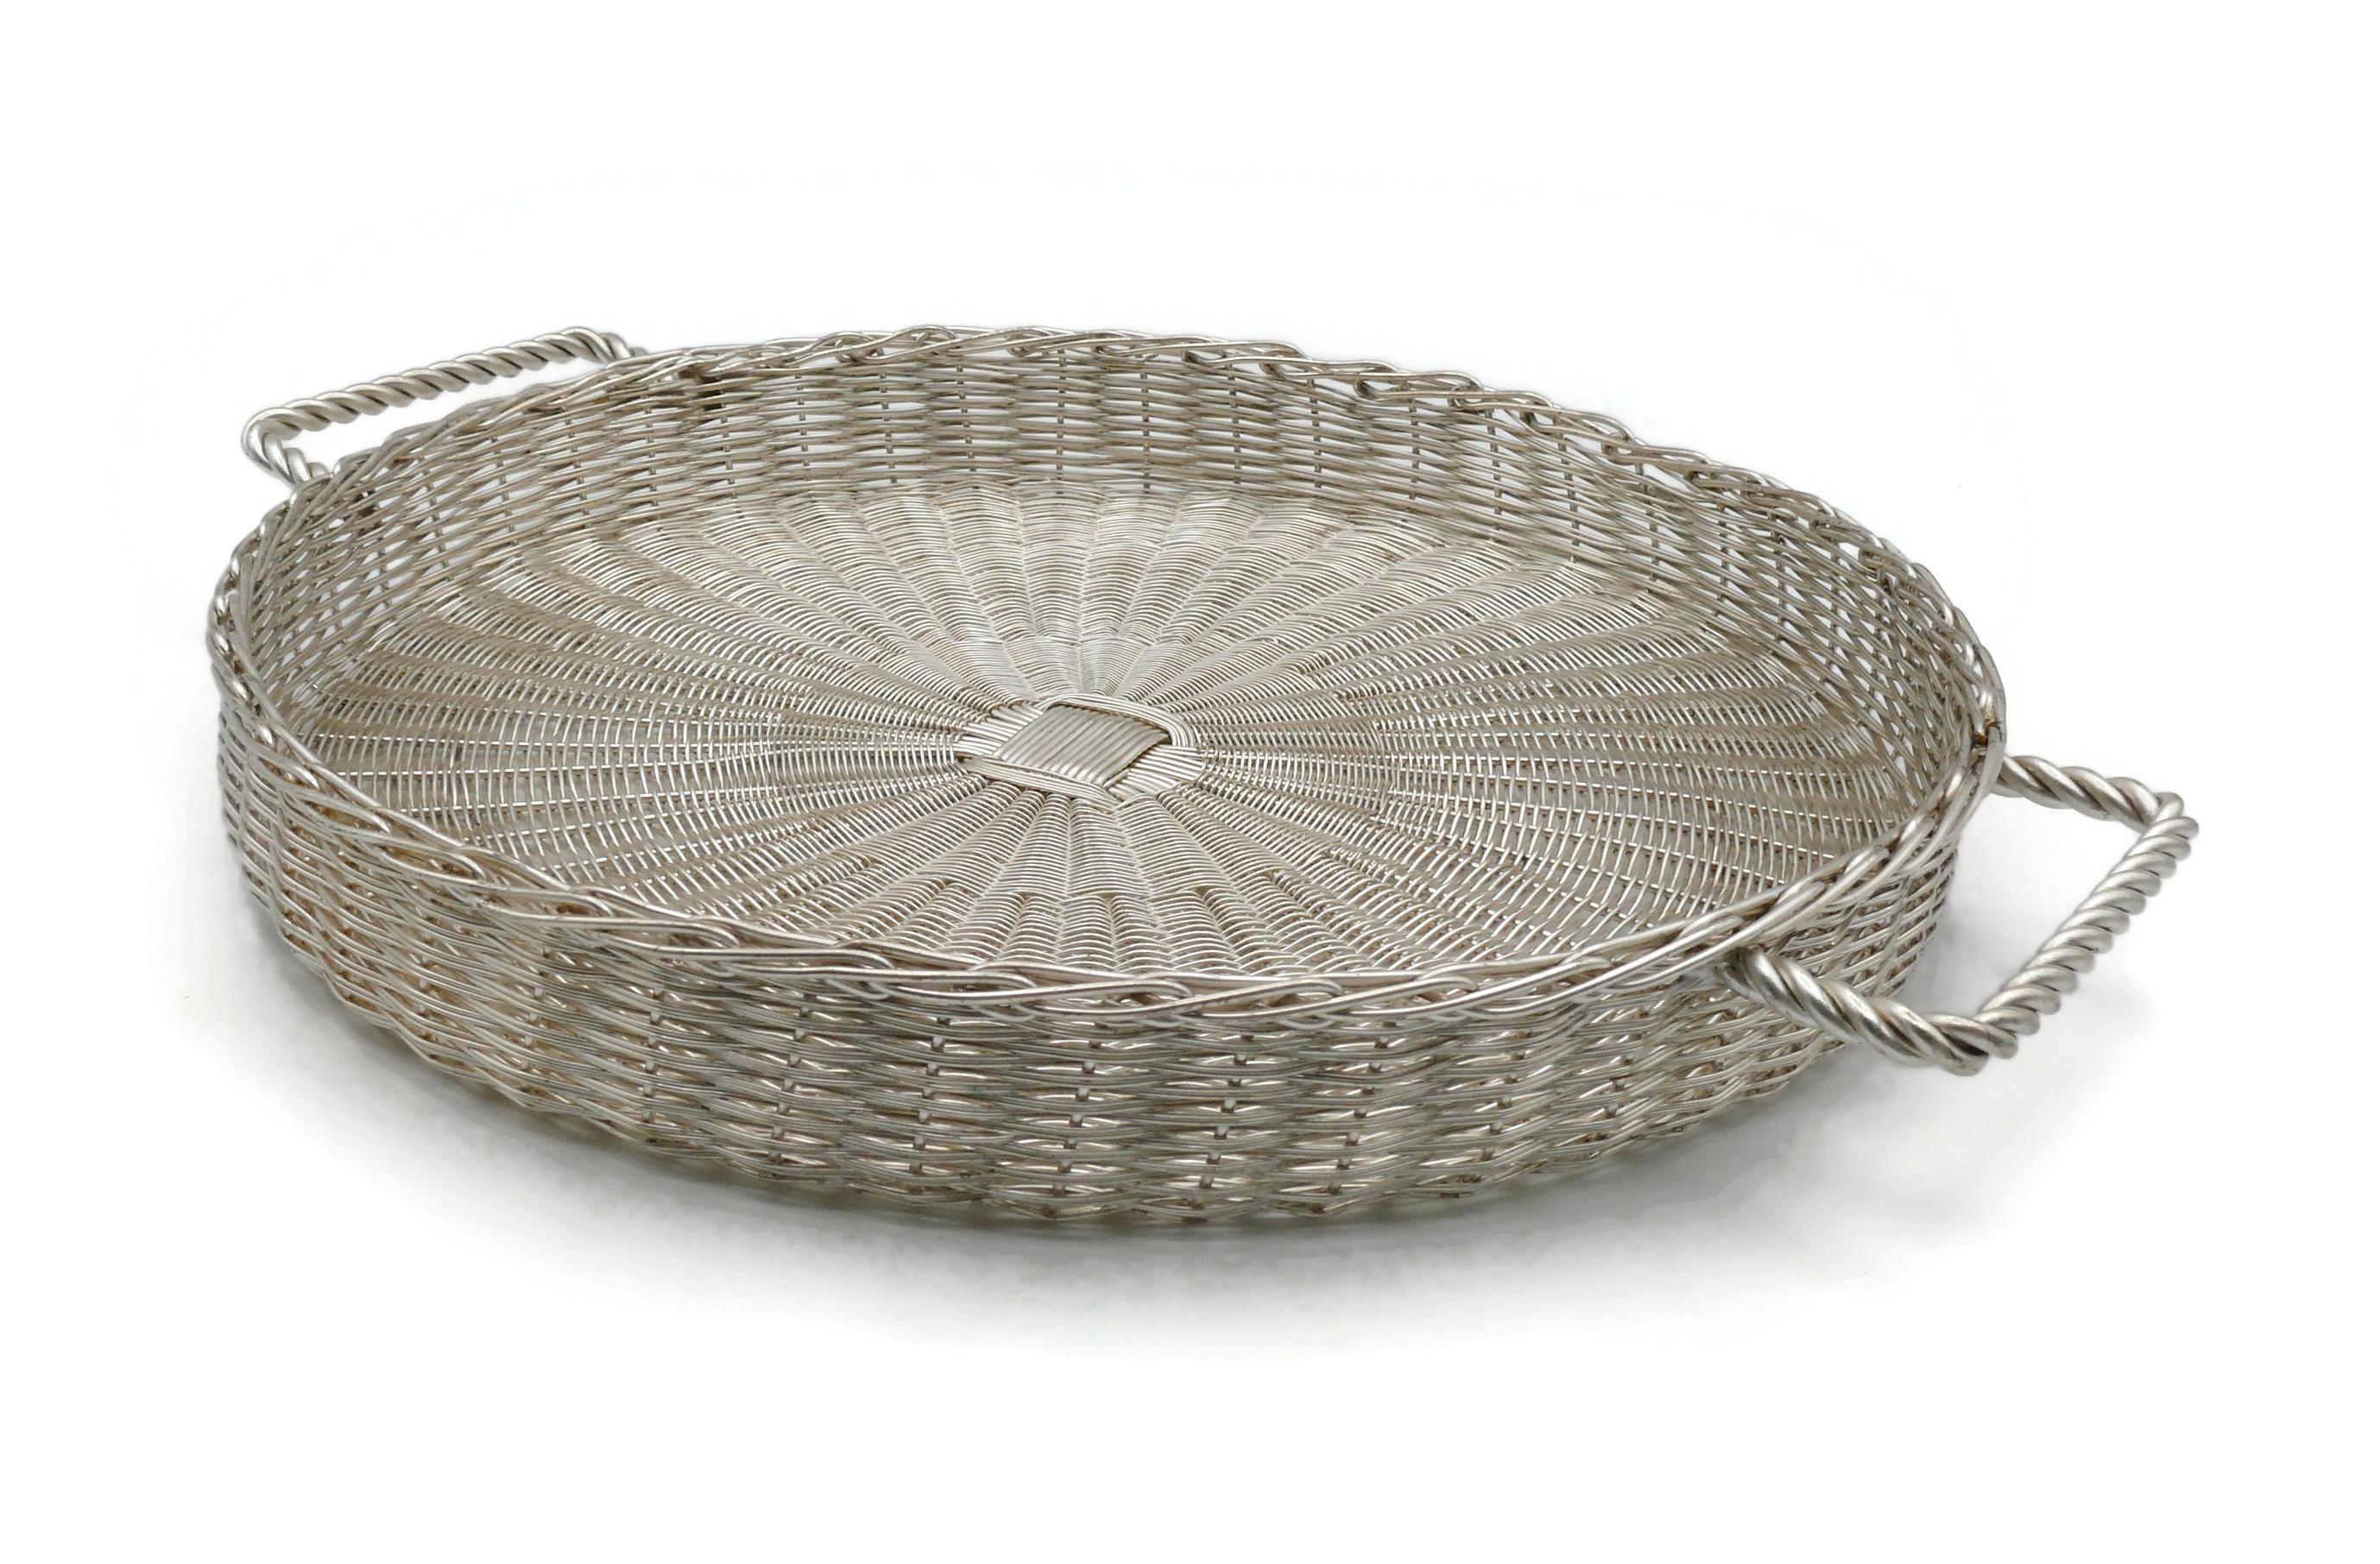 CHRISTIAN DIOR Home Collection Vintage Silver Plated Wicker Style Basket For Sale 2